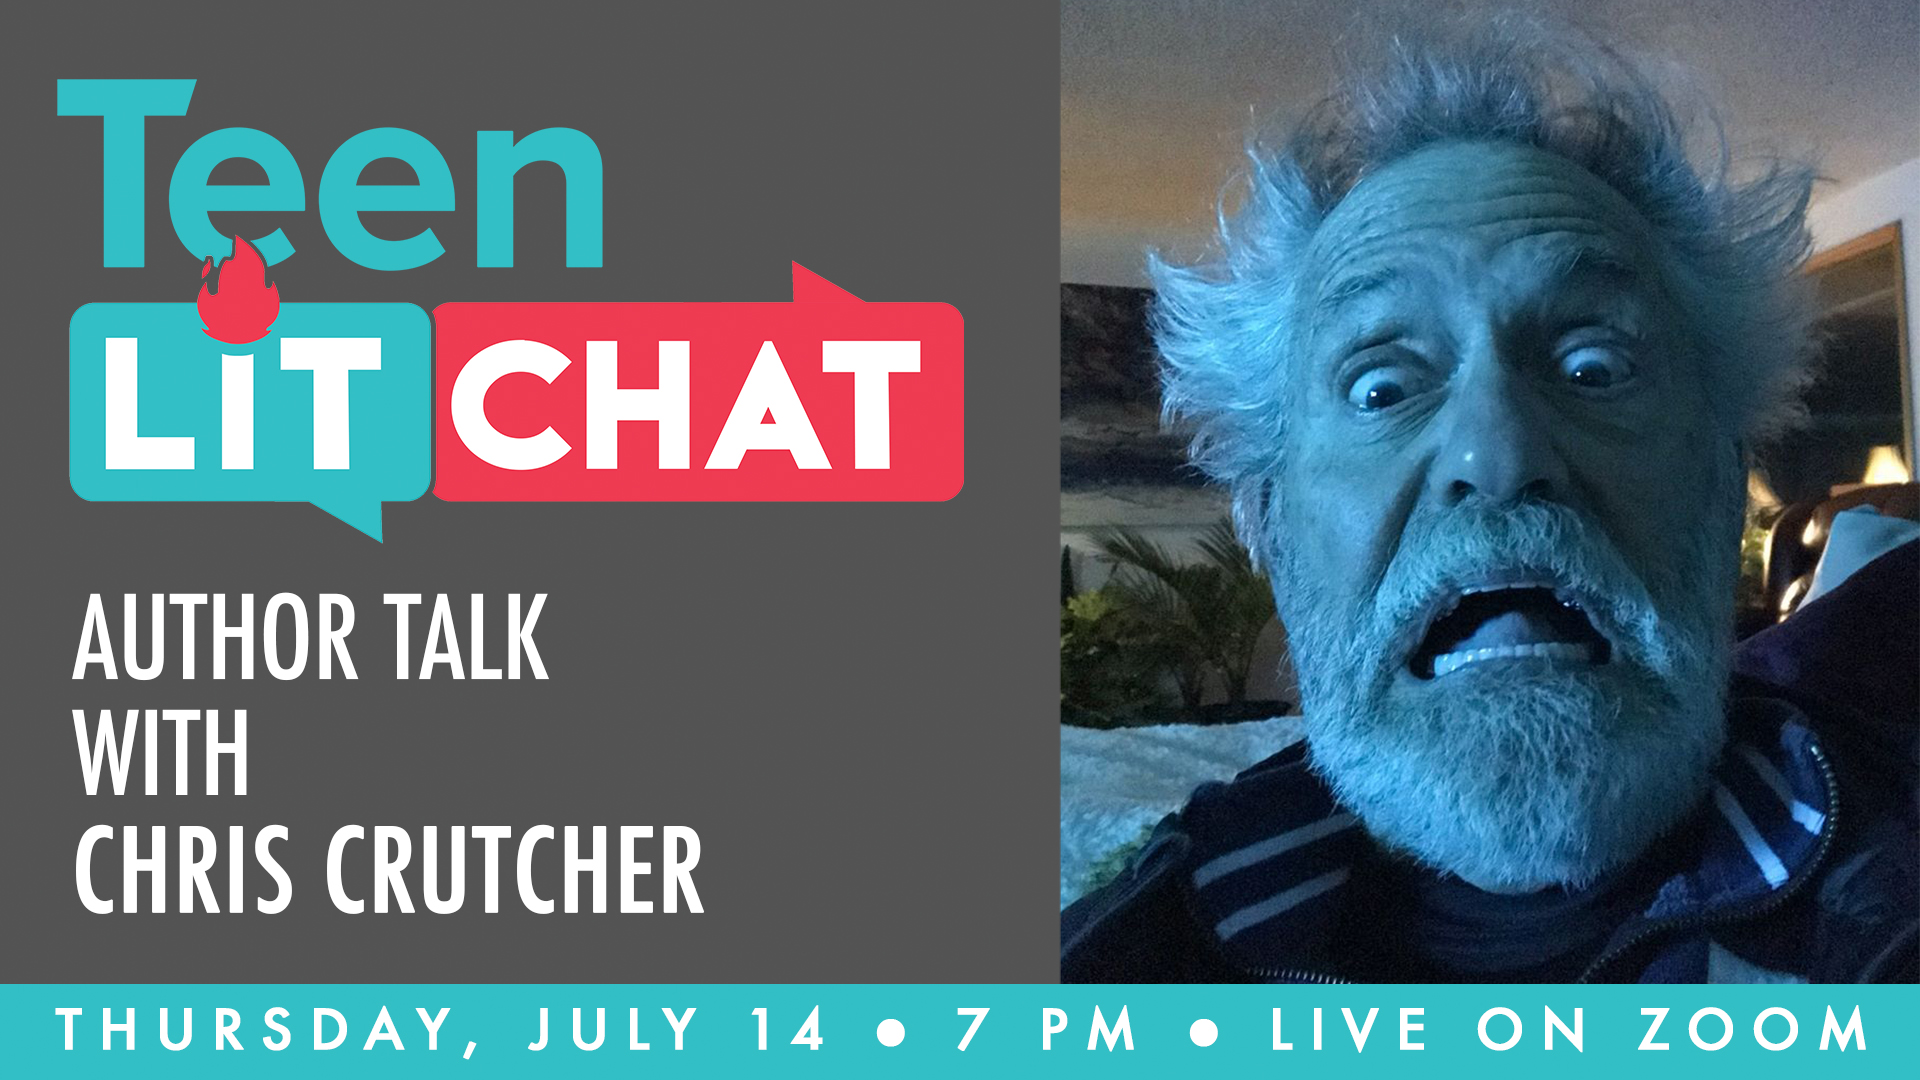 Teen Lit Chat with Author Chris Crutcher Live on Zoom Thursday, July 14 at 7 pm